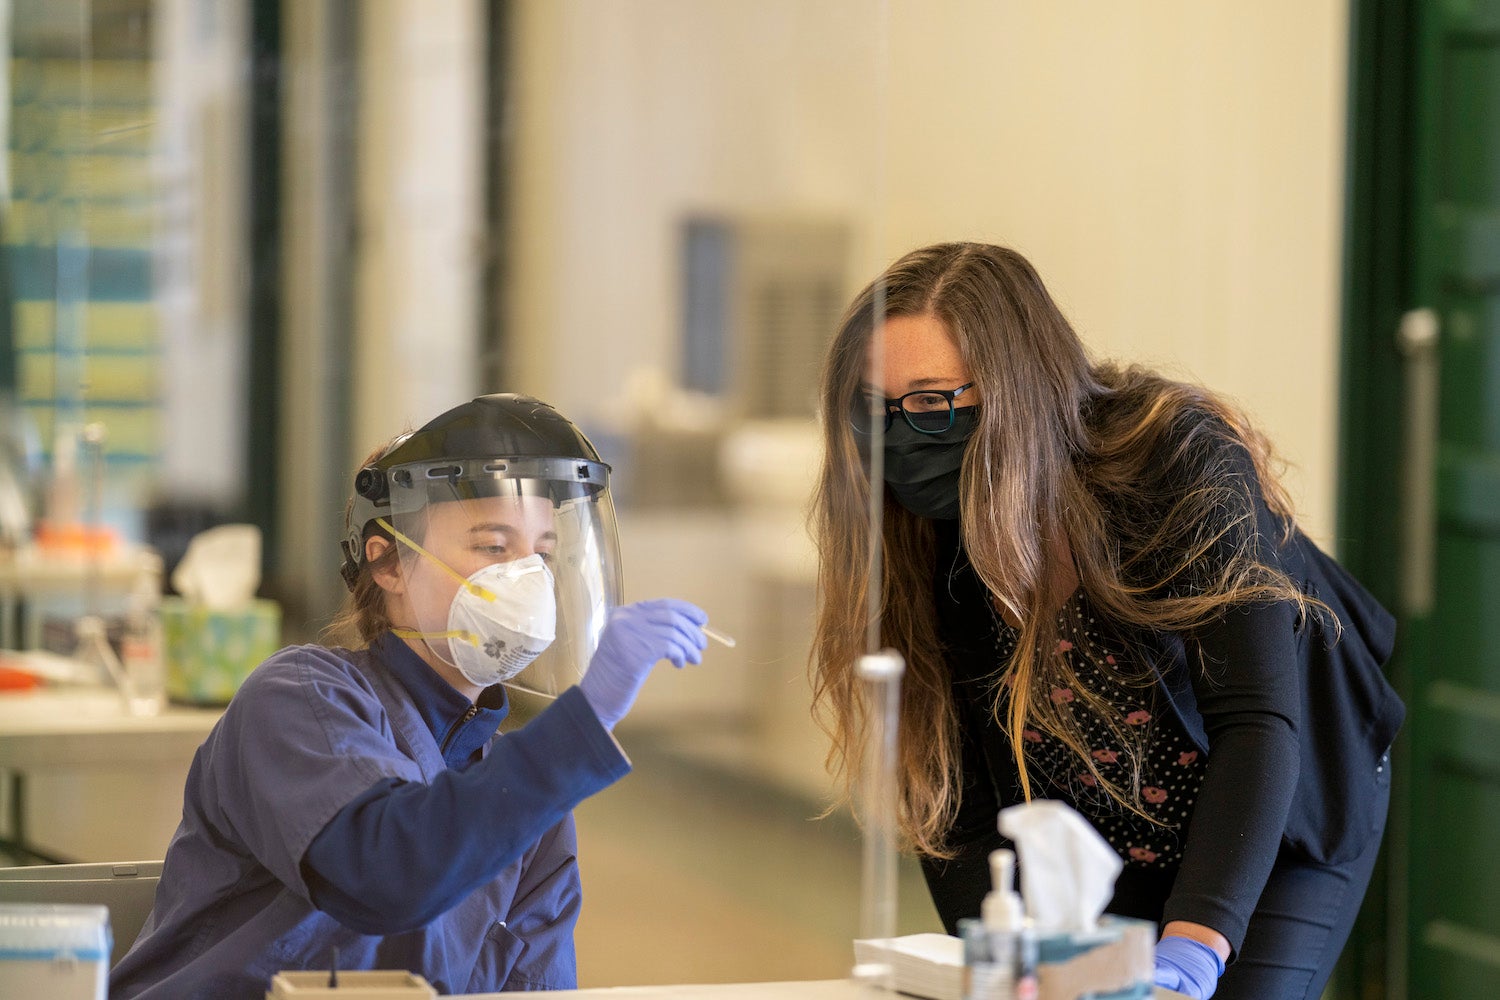 Two people wearing face masks and one also wearing a plastic face shield look at a COVID-19 sample in a plastic collection tube.